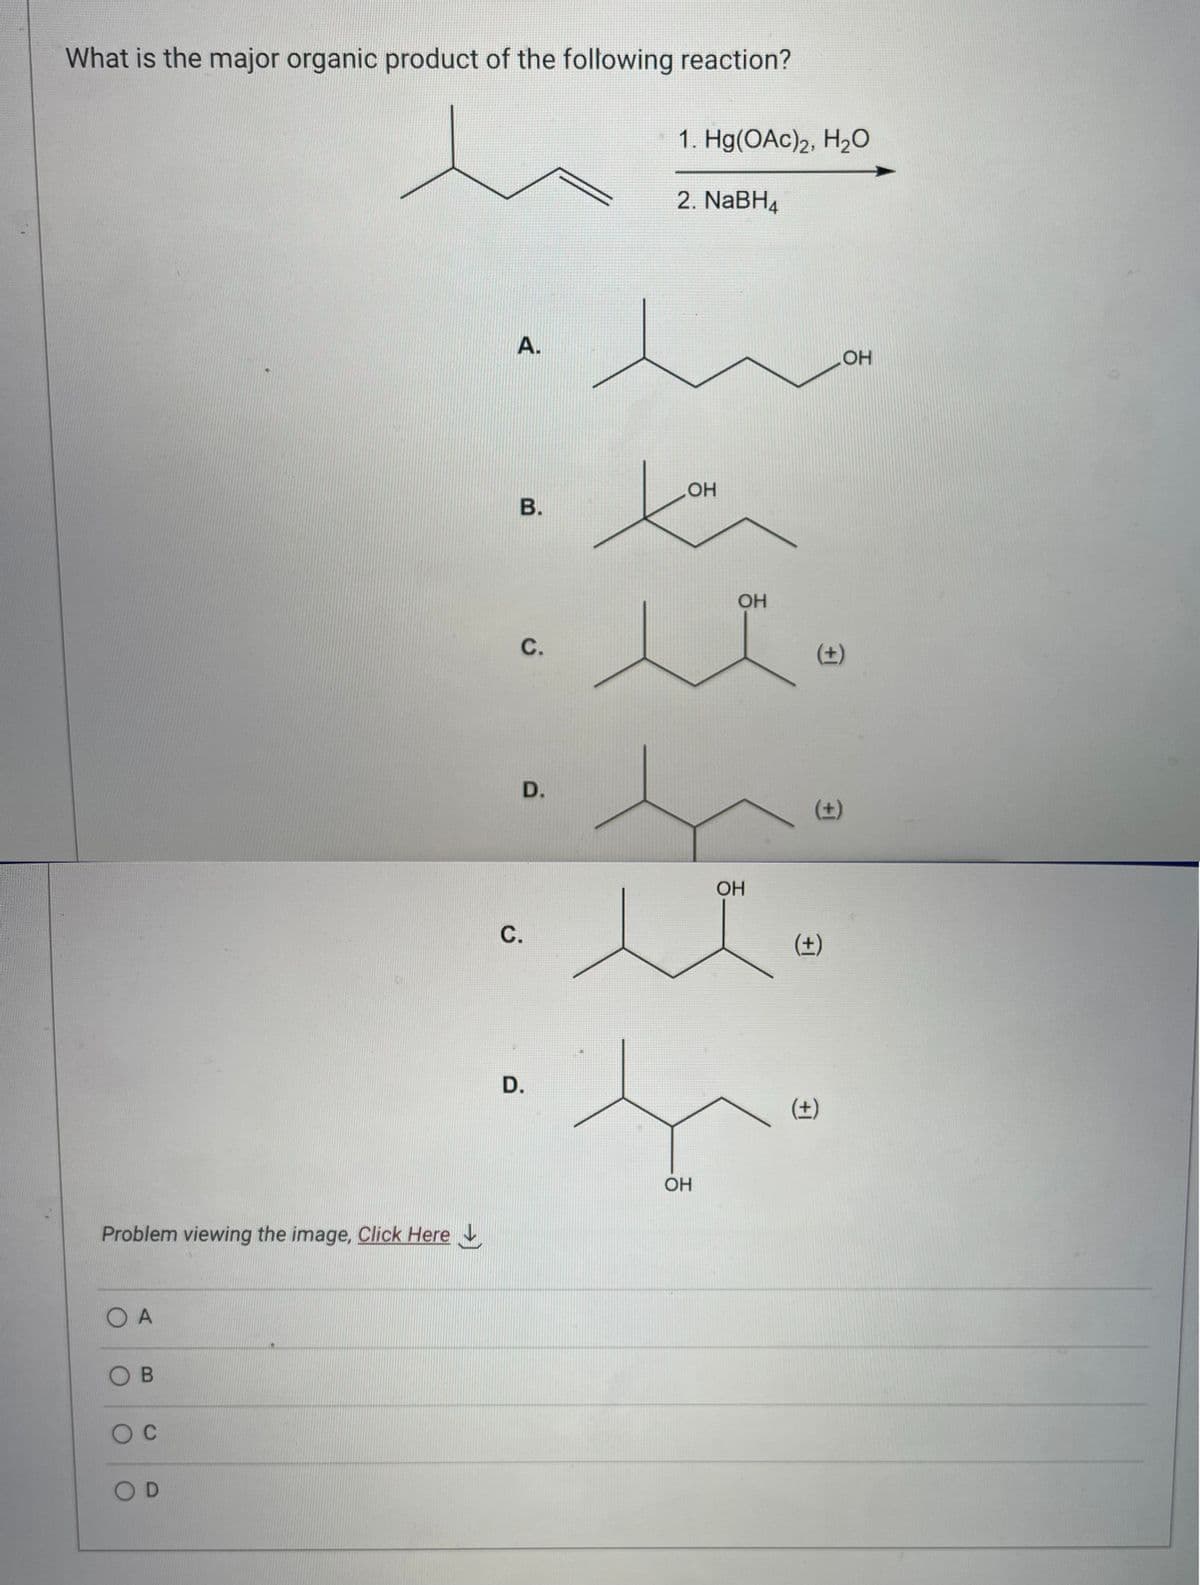 What is the major organic product of the following reaction?
Problem viewing the image, Click Here
O A
OB
O C
OD
A.
B.
C.
C.
D.
1. Hg(OAc)2, H₂O
2. NaBH4
D.
OH
t
to
allo
OH
OH
f
OH
(+)
OH
(+)
(±)